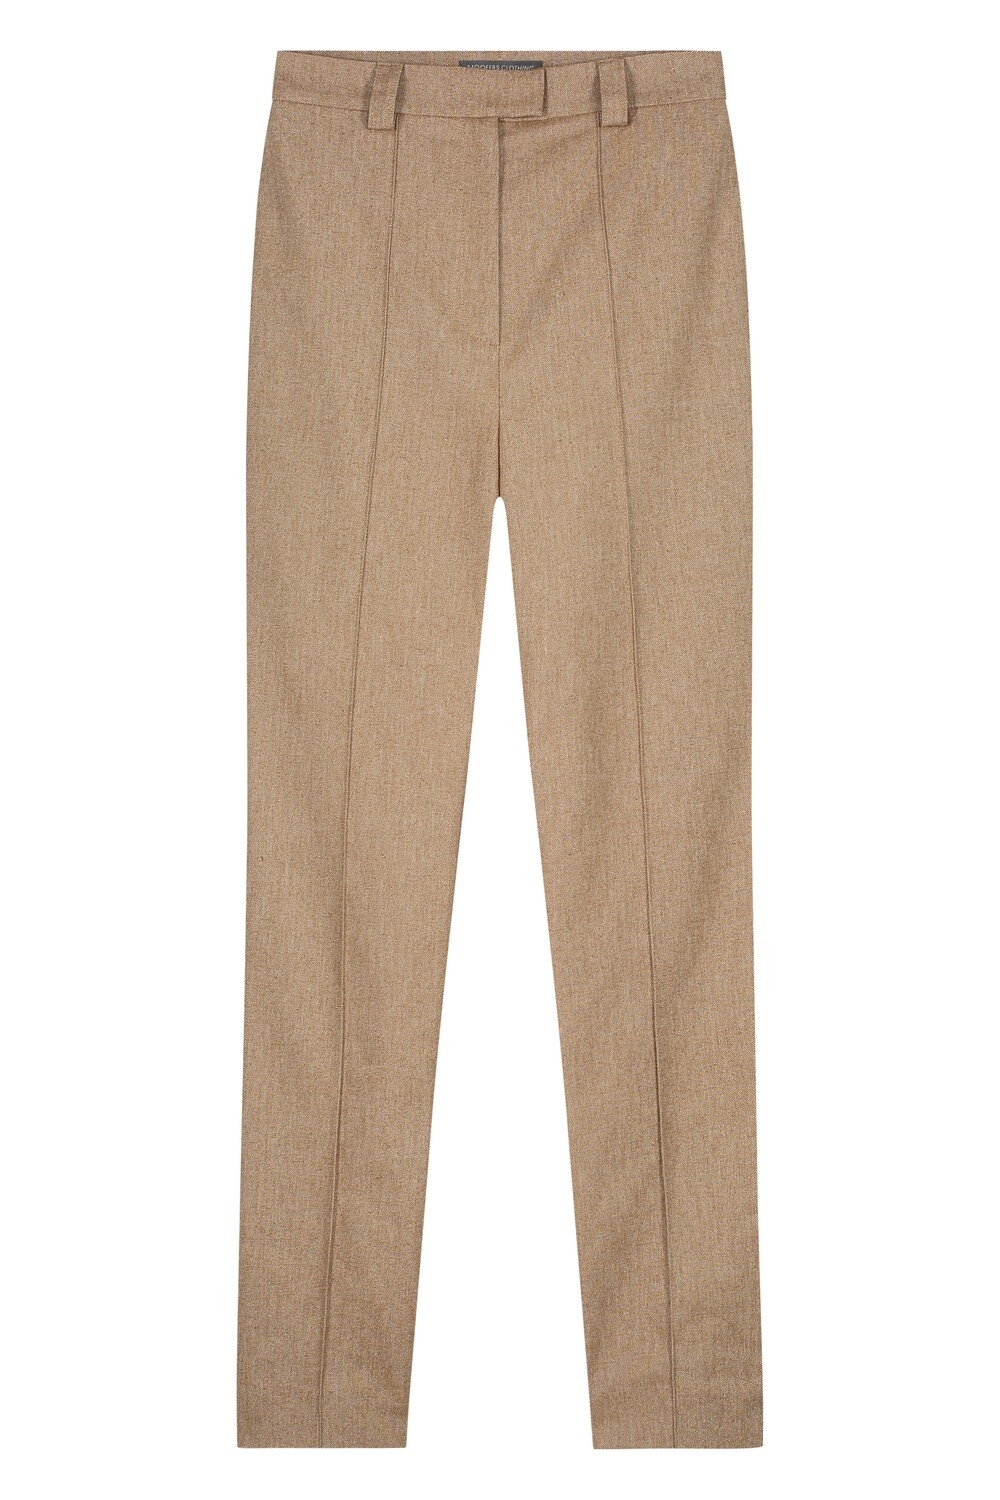 HIGH WAISTED RECYCLED / ORGANIC COTTON TROUSERS IN CAMEL